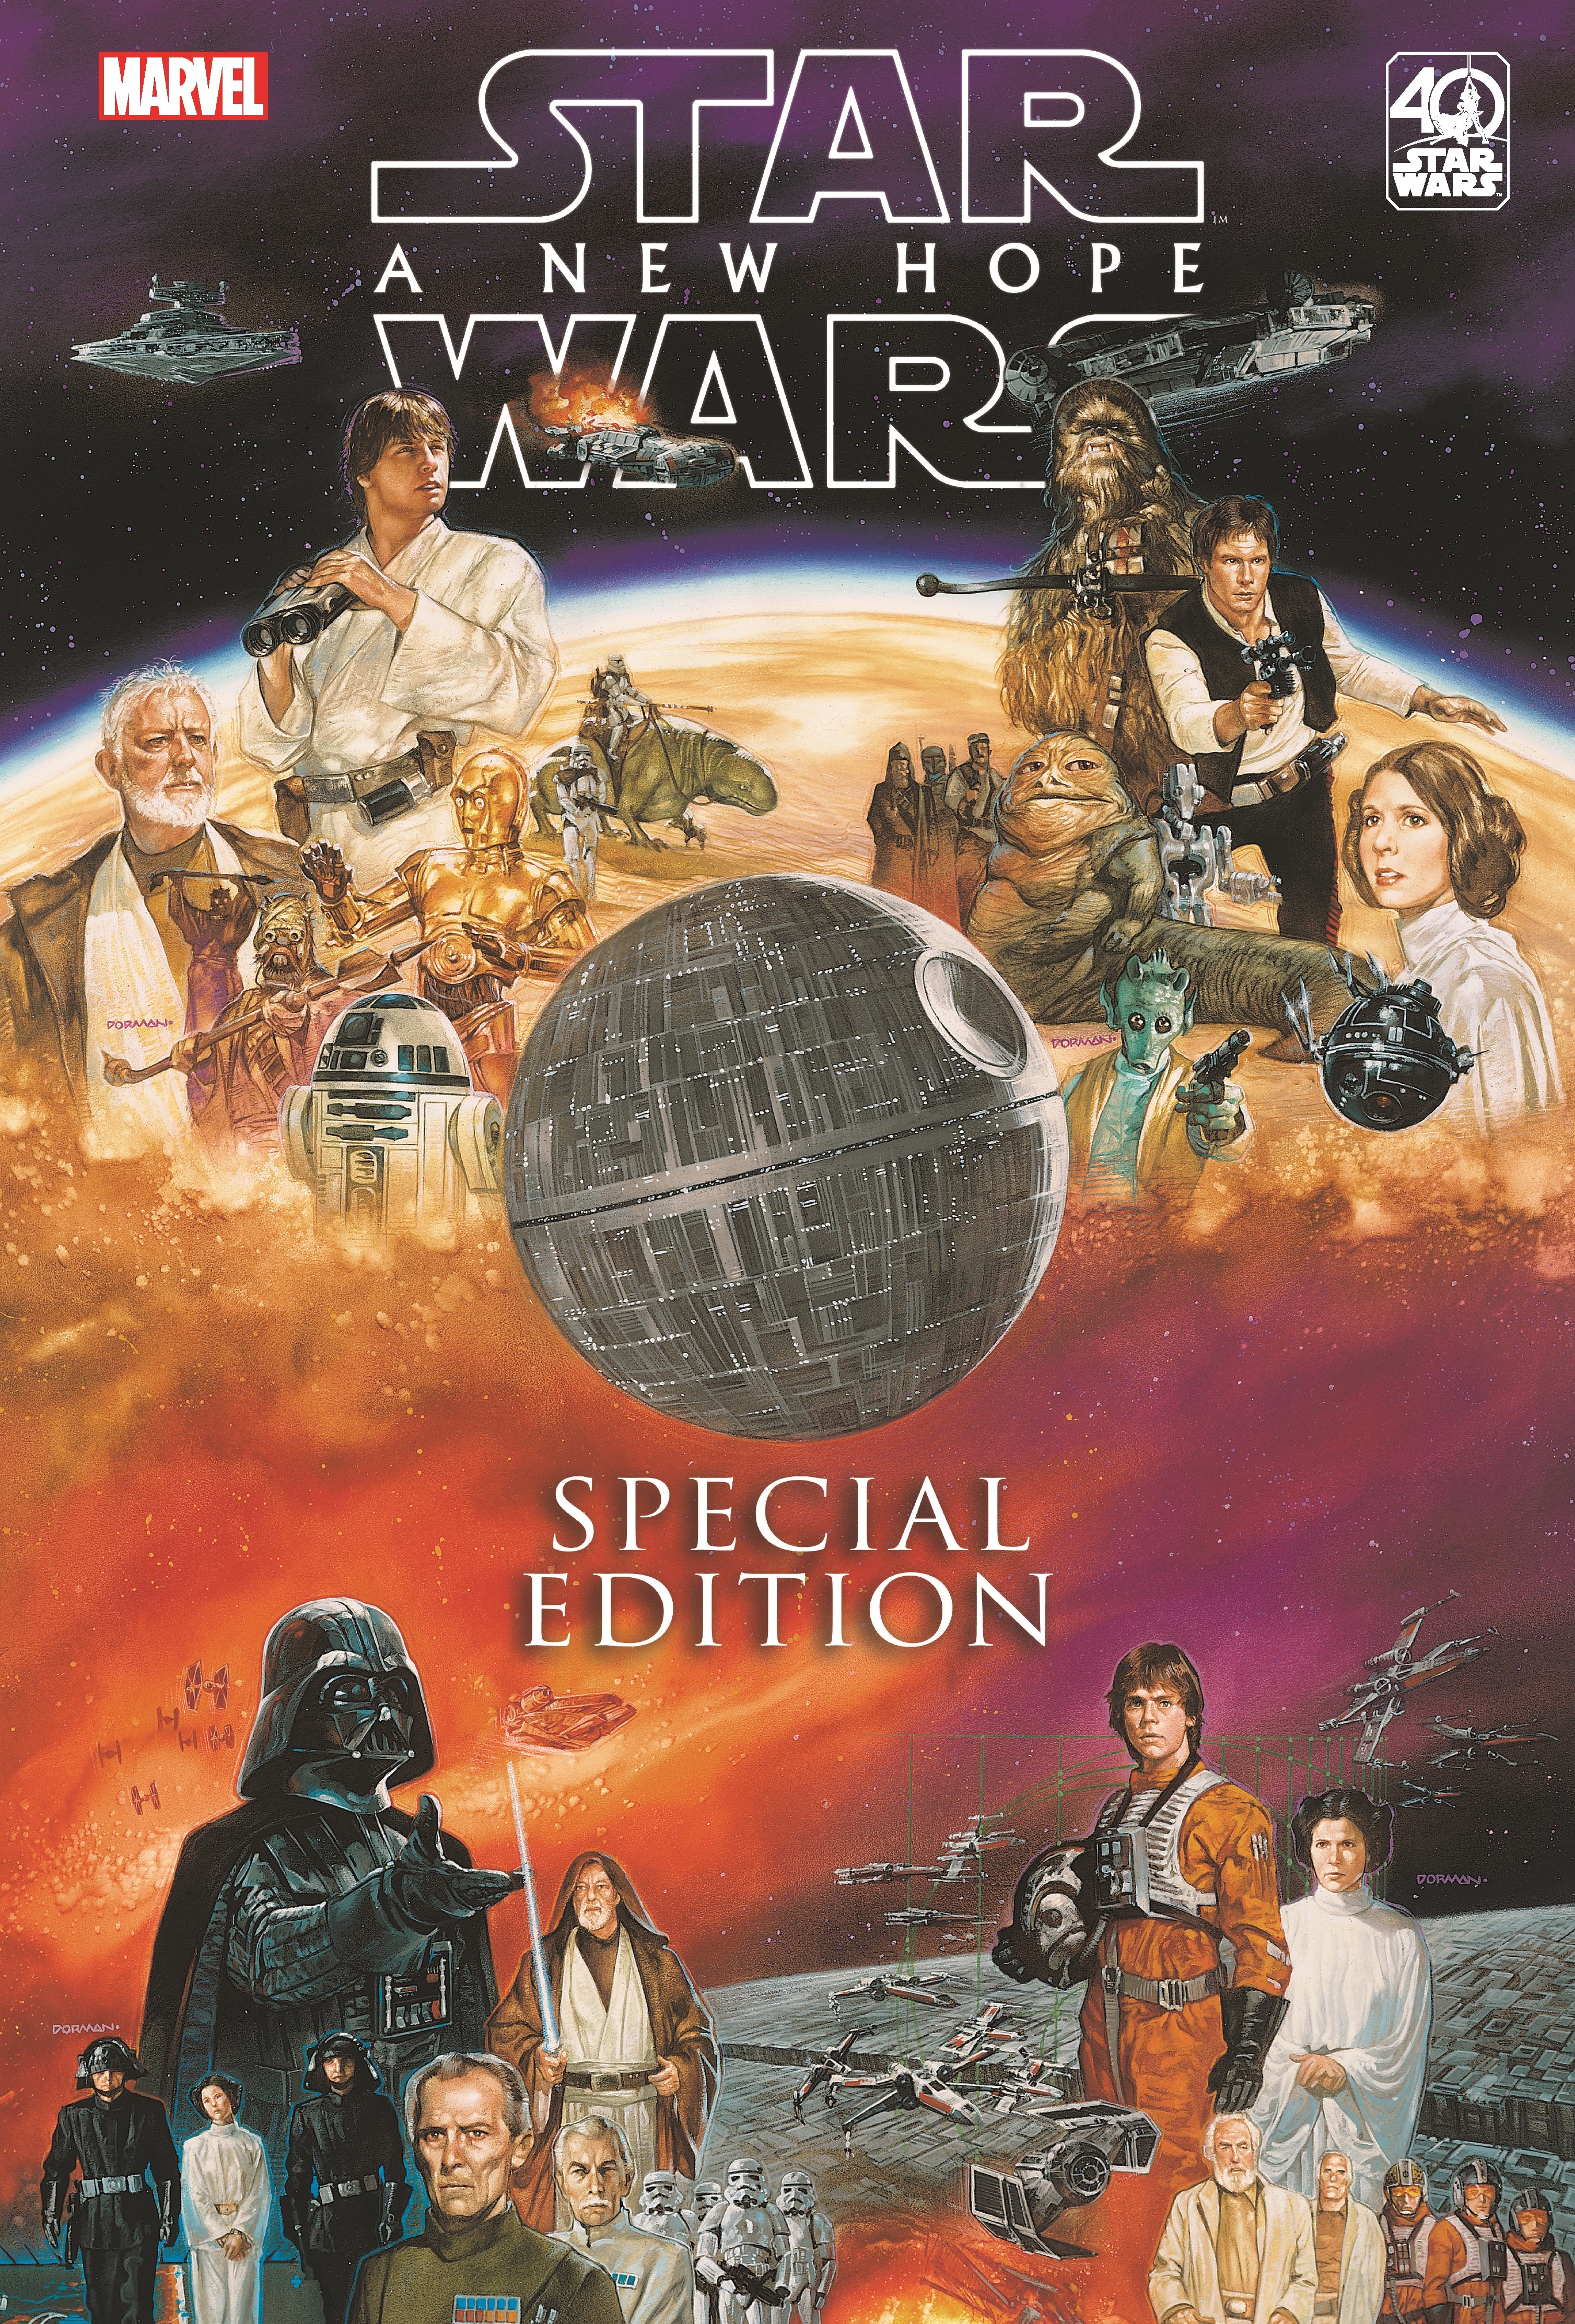 STAR WARS SPECIAL EDITION: A NEW HOPE HC (Hardcover)